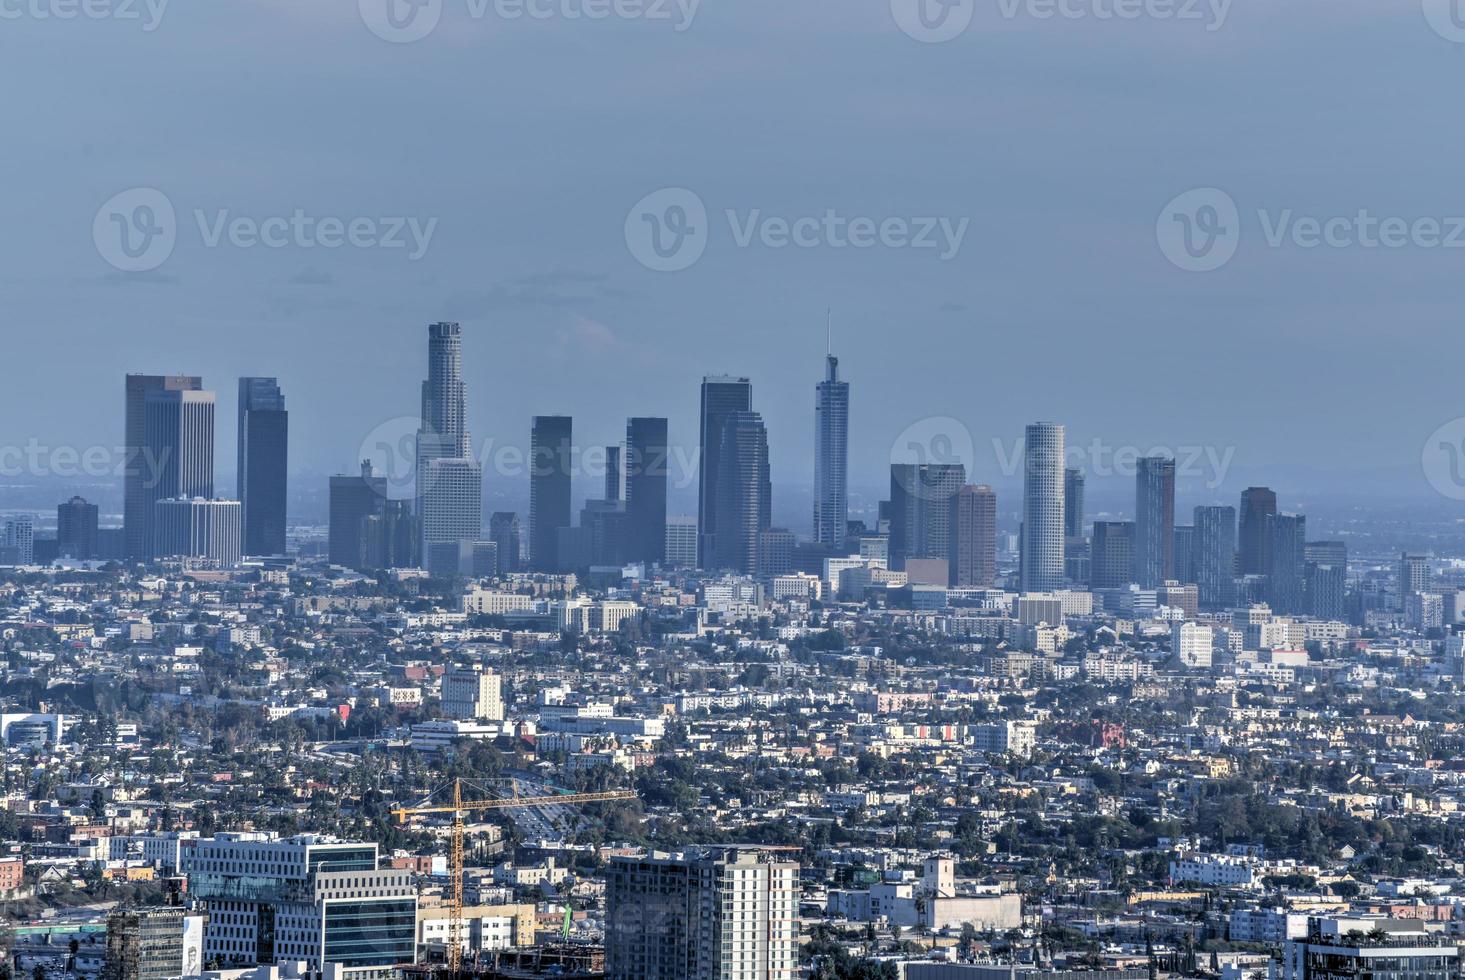 Downtown Los Angeles skyline over blue cloudy sky in California from Hollywood Hills. photo